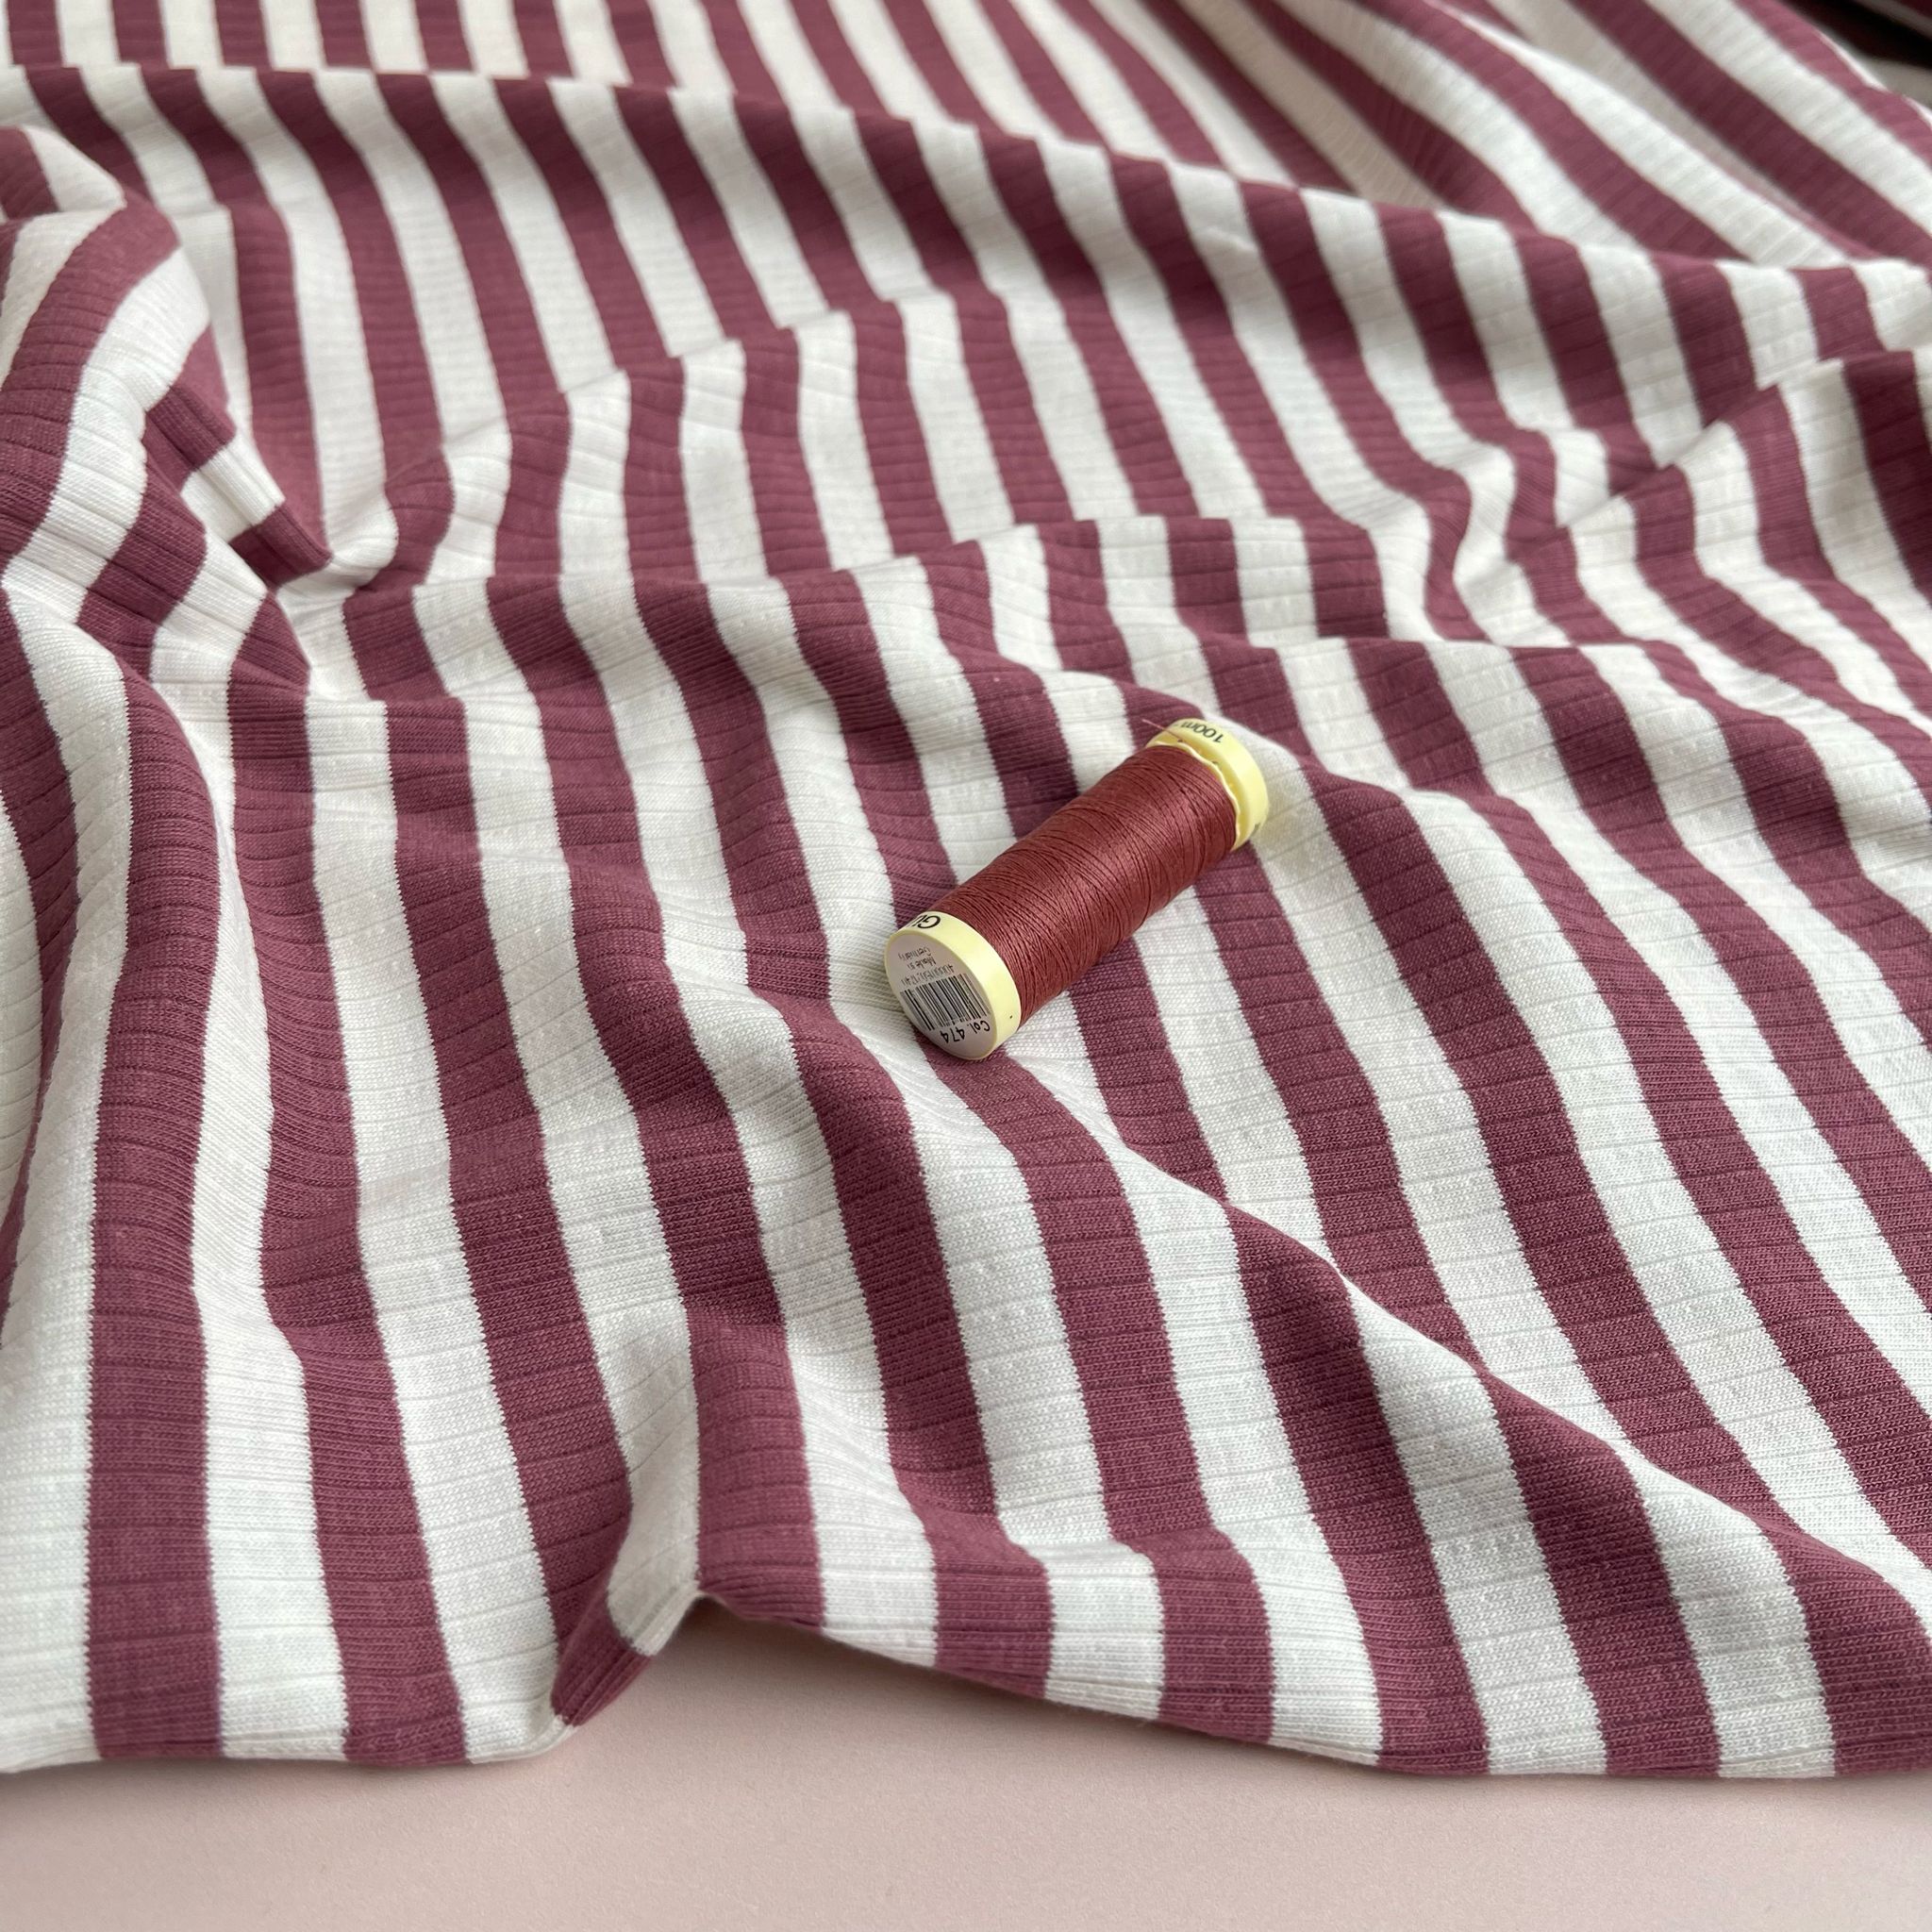 Yarn Dyed Striped Cotton Ribbed Jersey in Dark Mauve and White